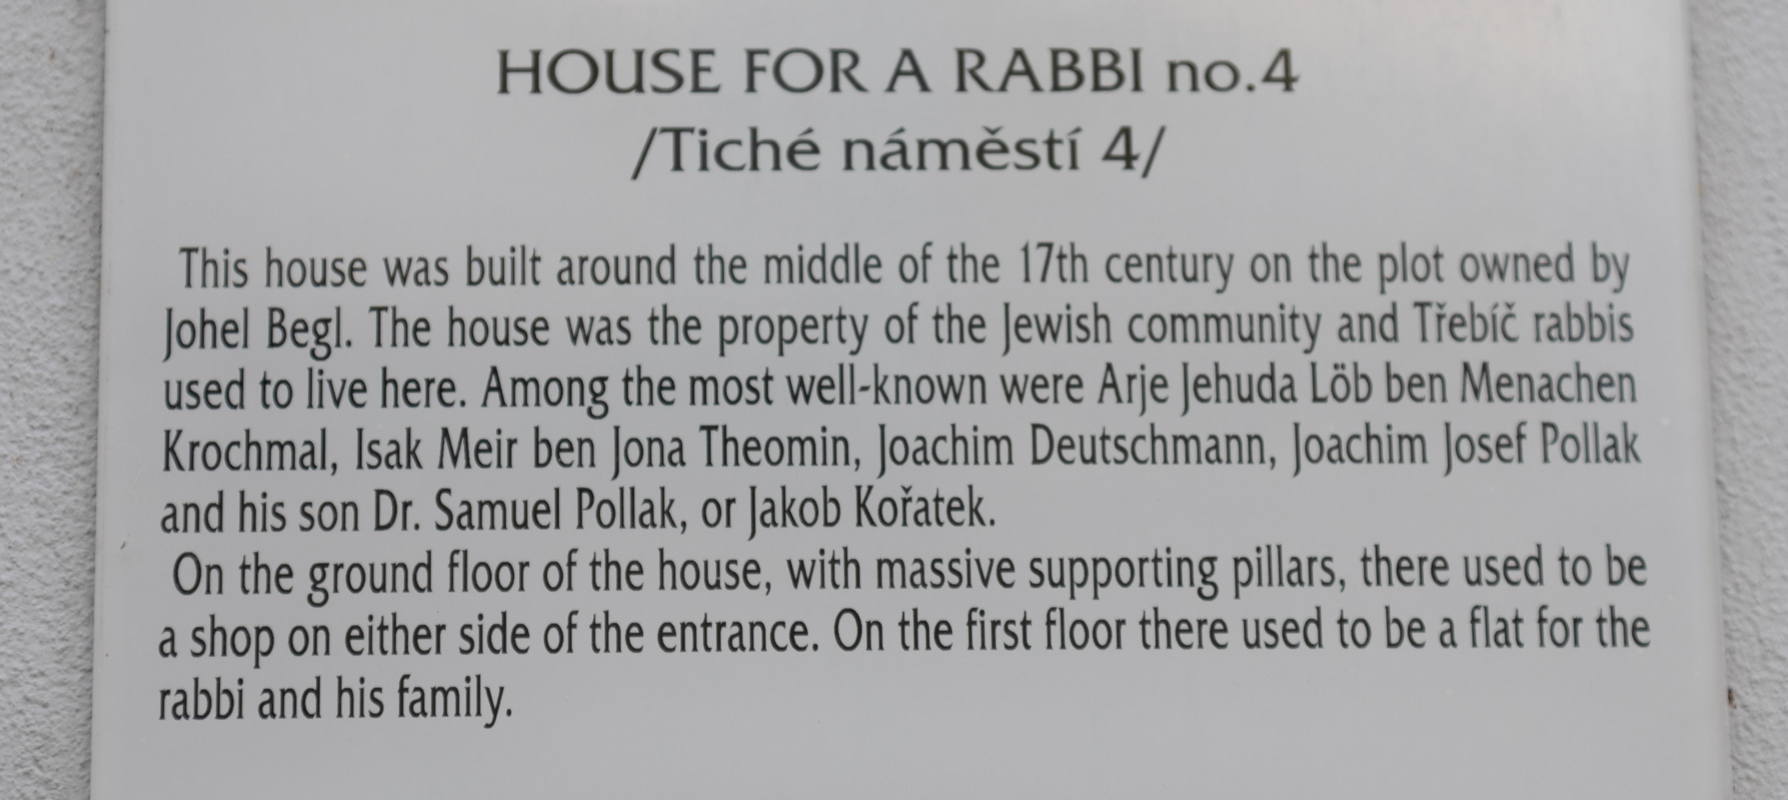 Rabbi’s house Recently purchased by Hussite church